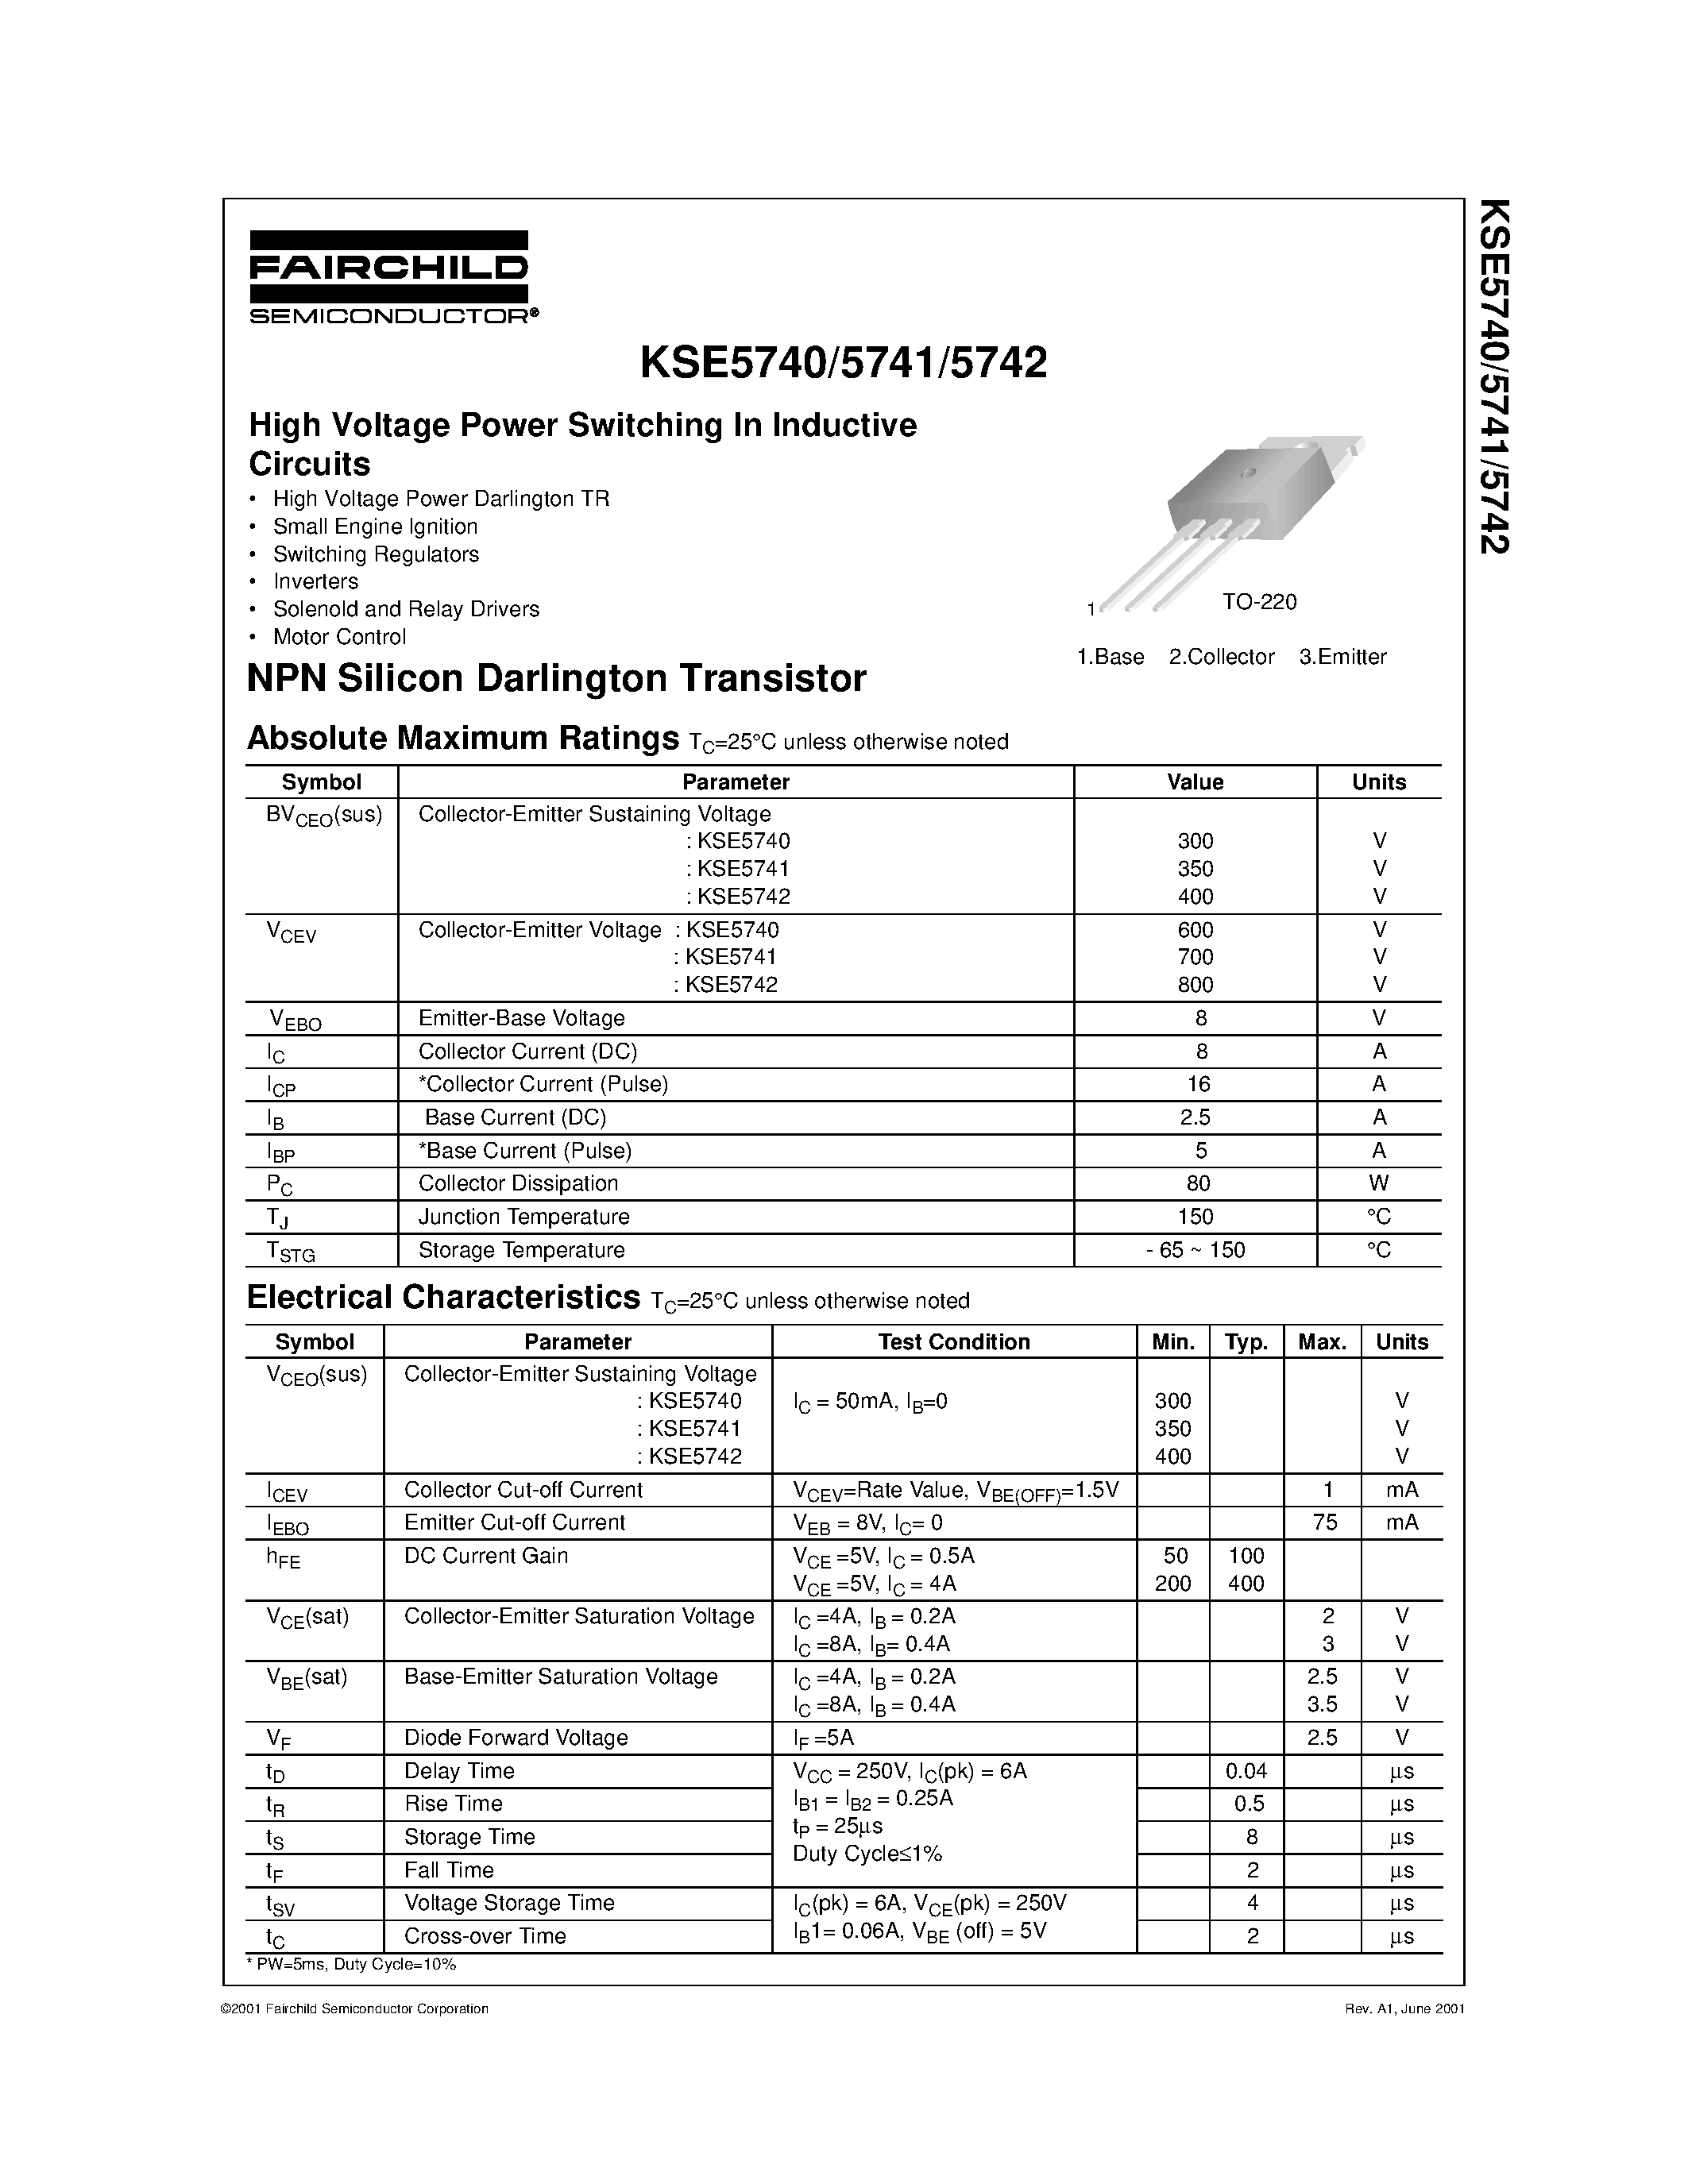 Datasheet KSE5742 - High Voltage Power Switching In Inductive Circuits page 1